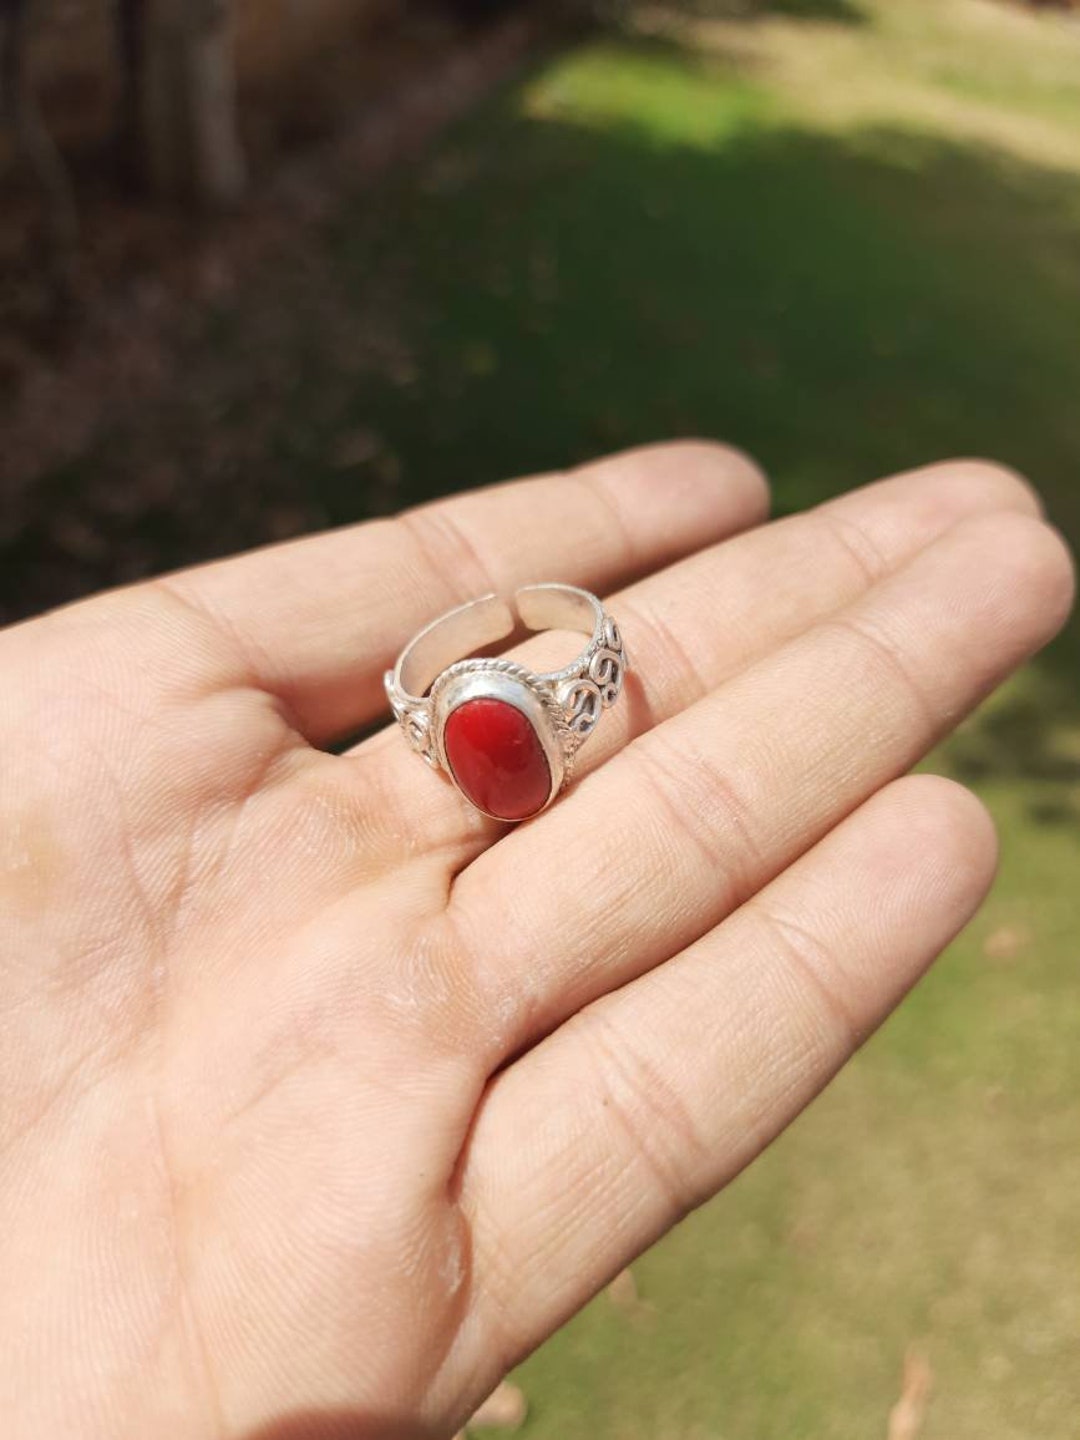 RED CARNELIAN & SILVER RING. Jewellery & Gemstones - Rings - Auctionet